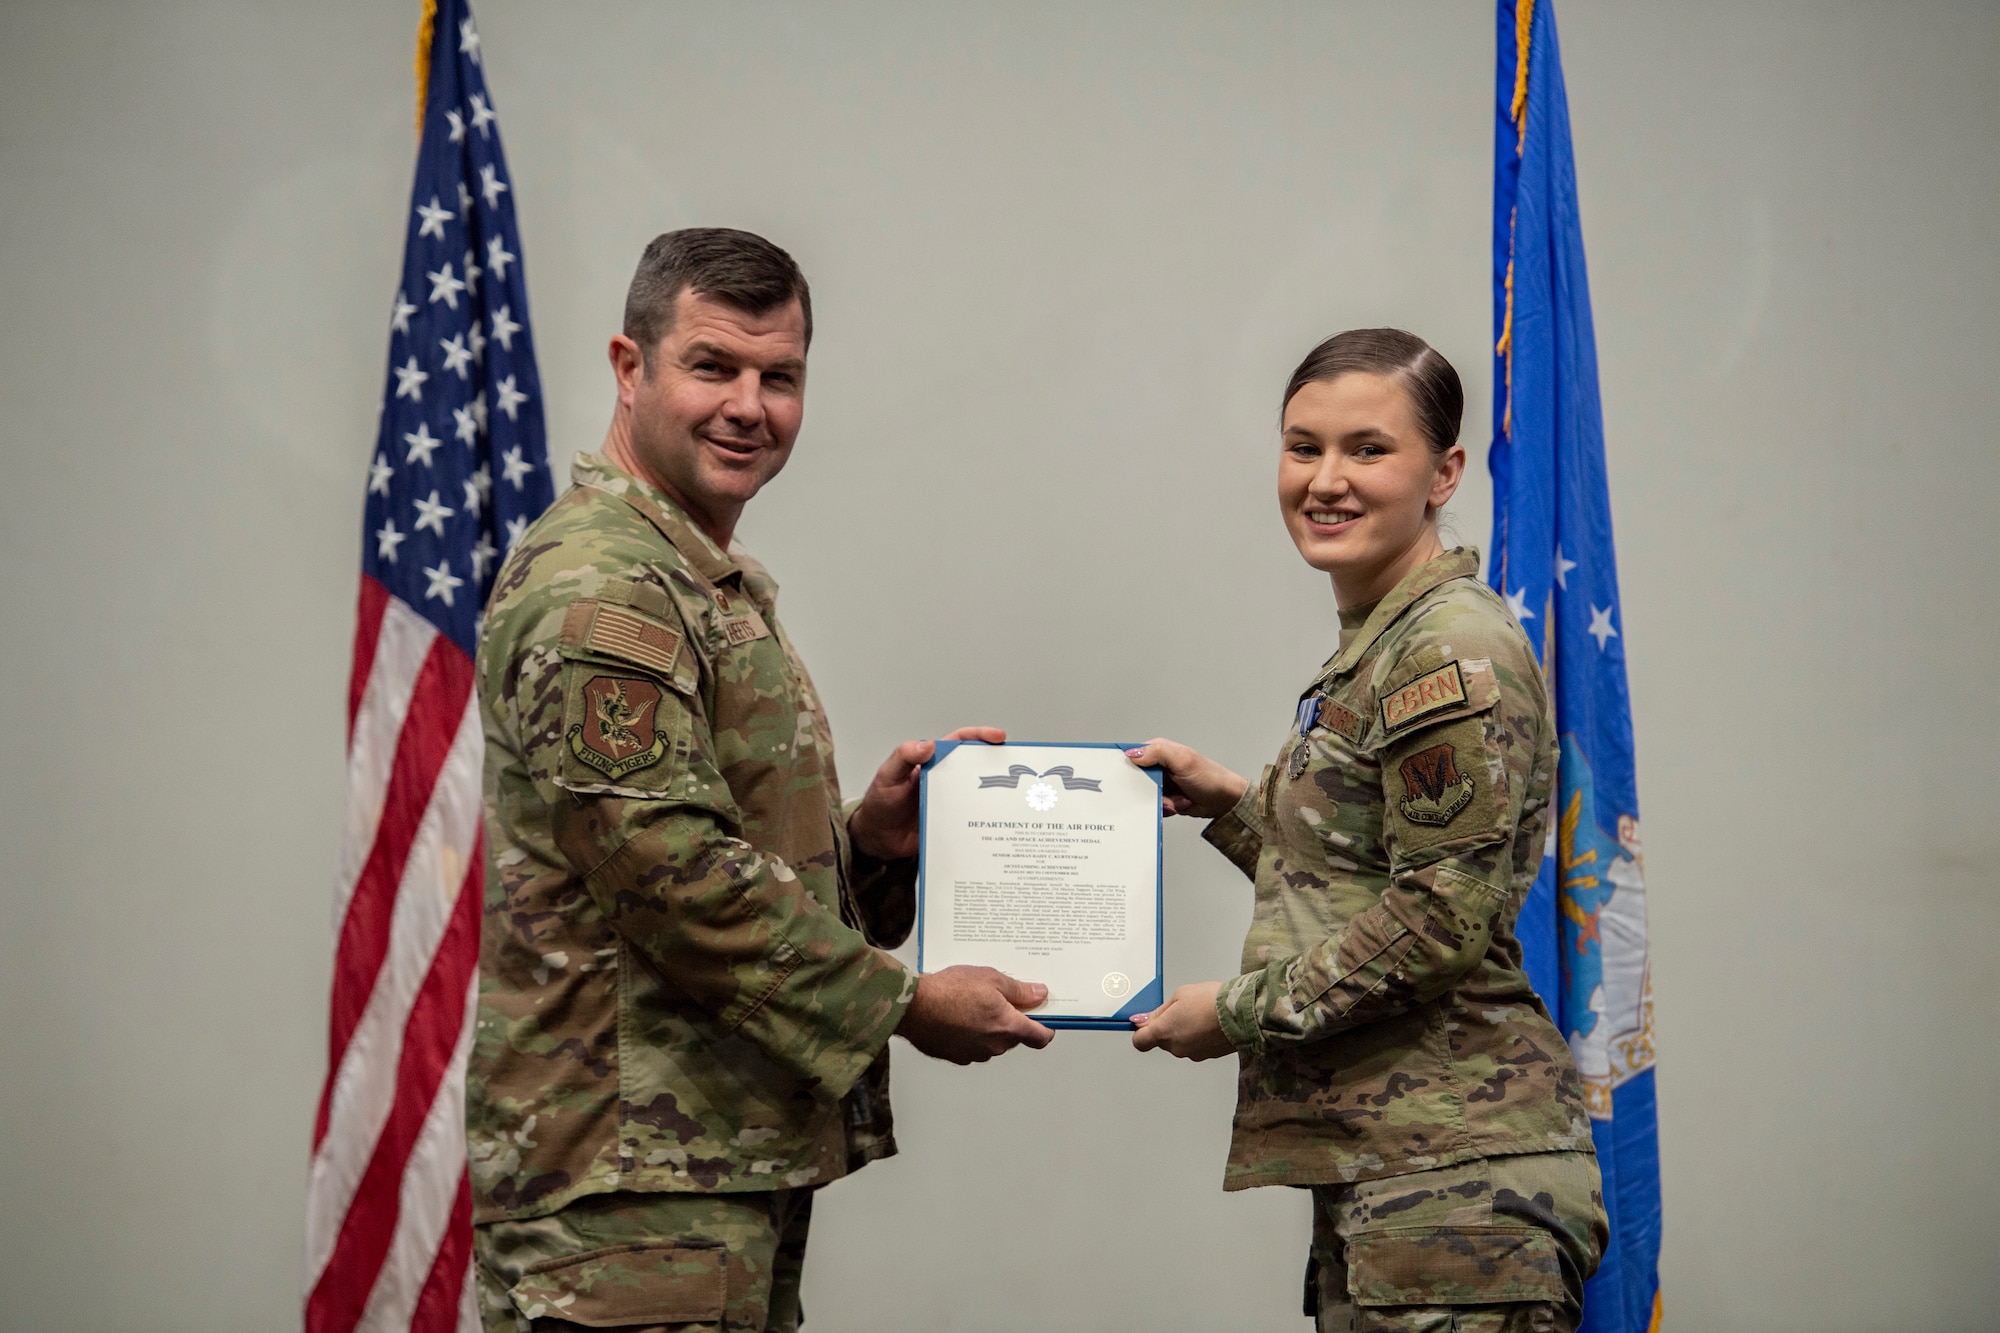 Base commander stands with bronze star recipient for photo